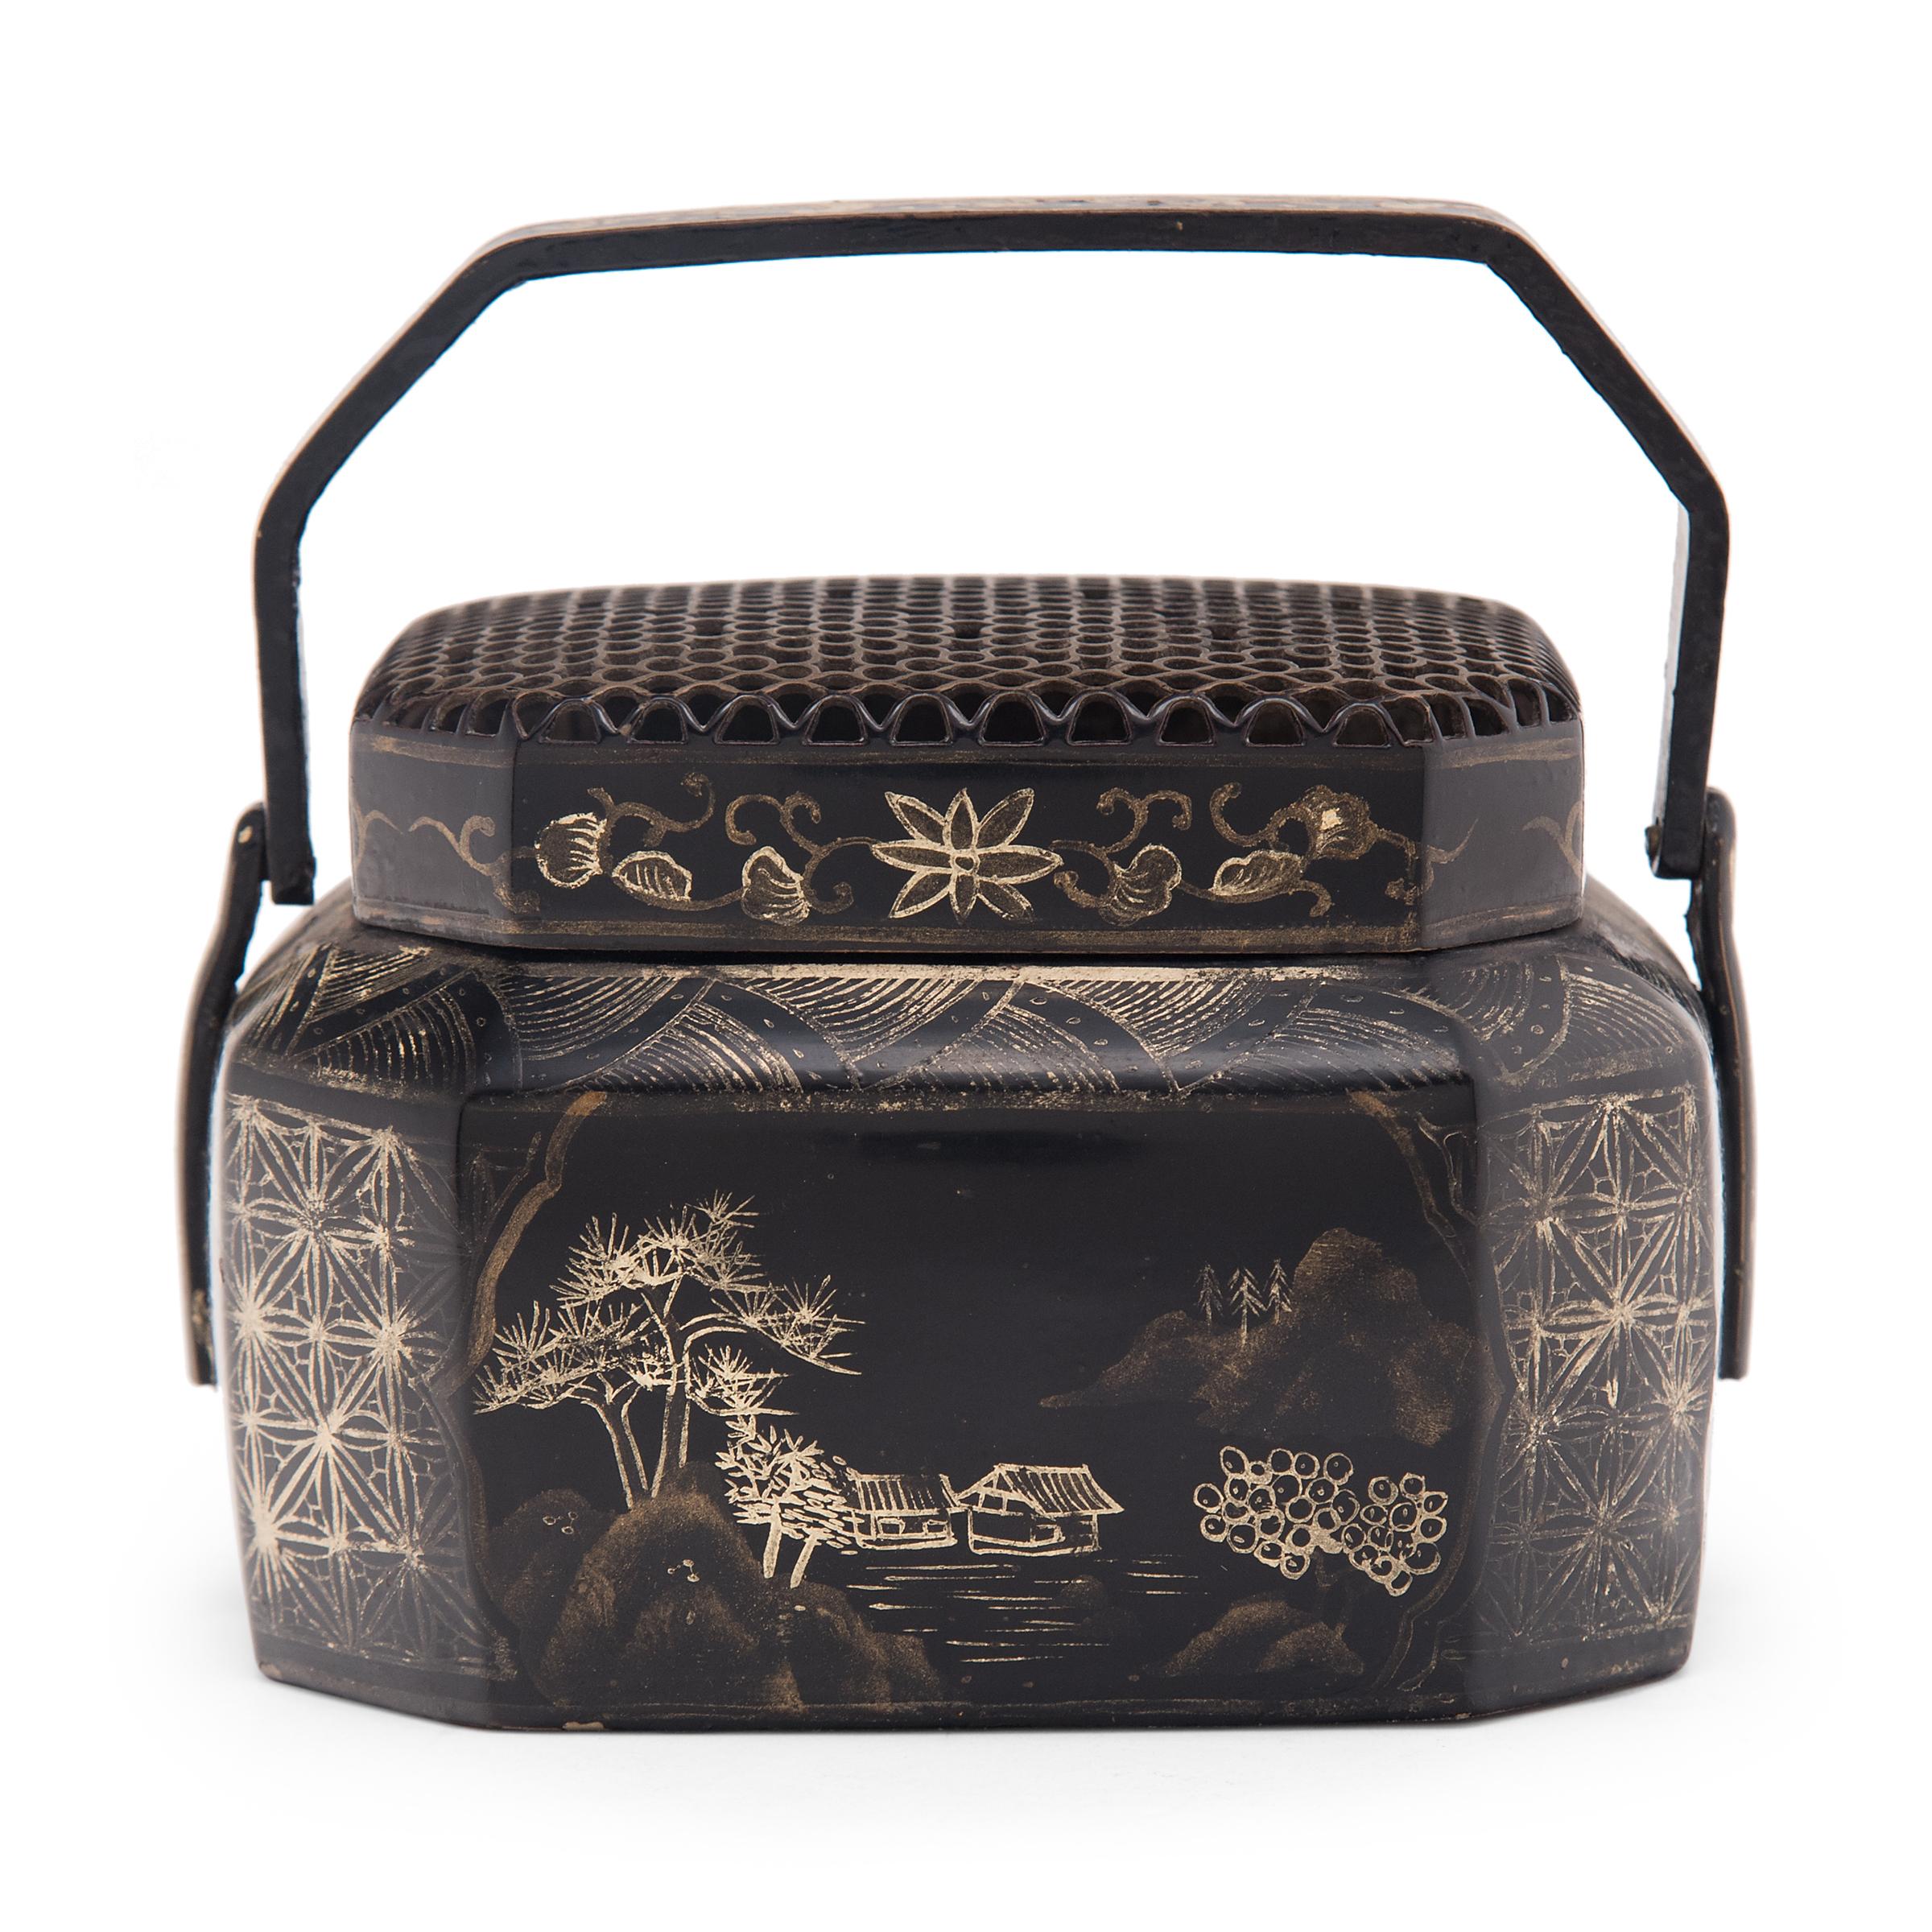 Qing Chinese Painted Shan Shui Brazier, c. 1900